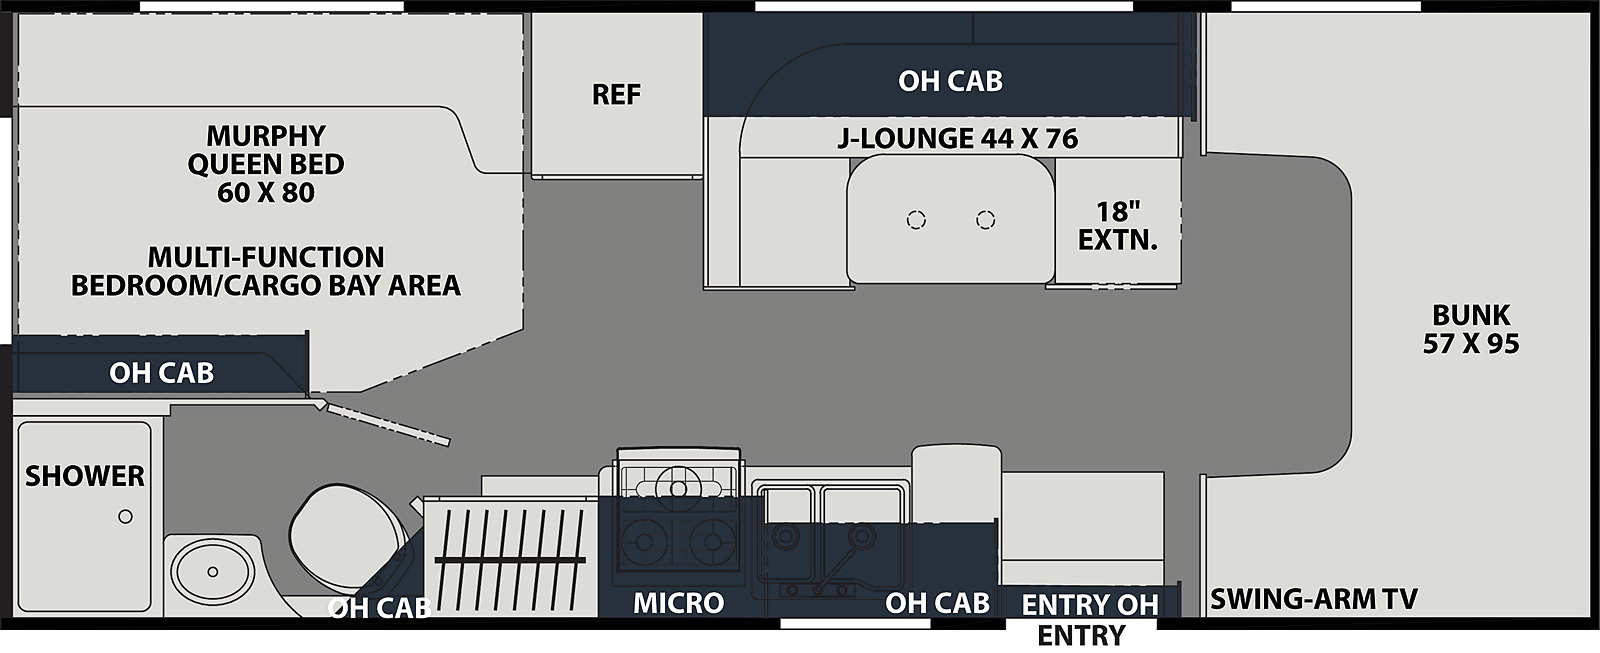 The Leprechaun 220XG CHEVY 3500 has 0 slideouts. Interior layout from front to back; front 57 inch by 95 inch bunk with swing arm TV; door side kitchen with microwave above stovetop, double basin sink and overhead cabinet; off-door side 44 inch by 76 inch J-Lounge with 18 inch extension and overhead cabinets and refrigerator; rear off-door side 60 inch by 80 inch murphy queen bed in multi-function bedroom/cargo bay area with overhead cabinets; rear door side bathroom with shower, toilet and sink.